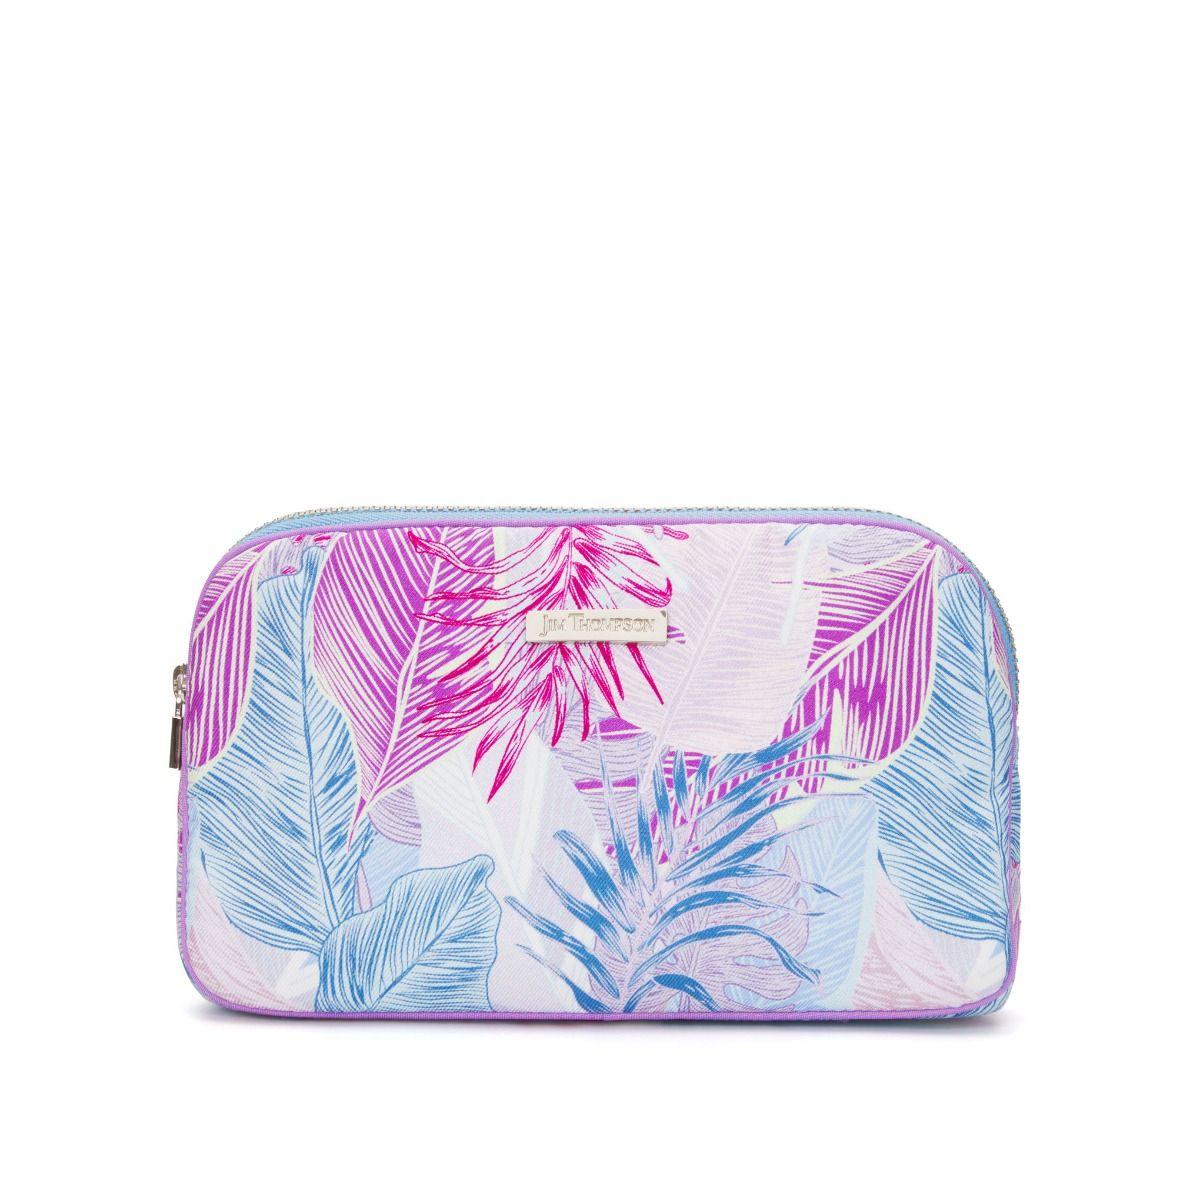 Leave the Leaves Silk Cosmetic Case - Purple